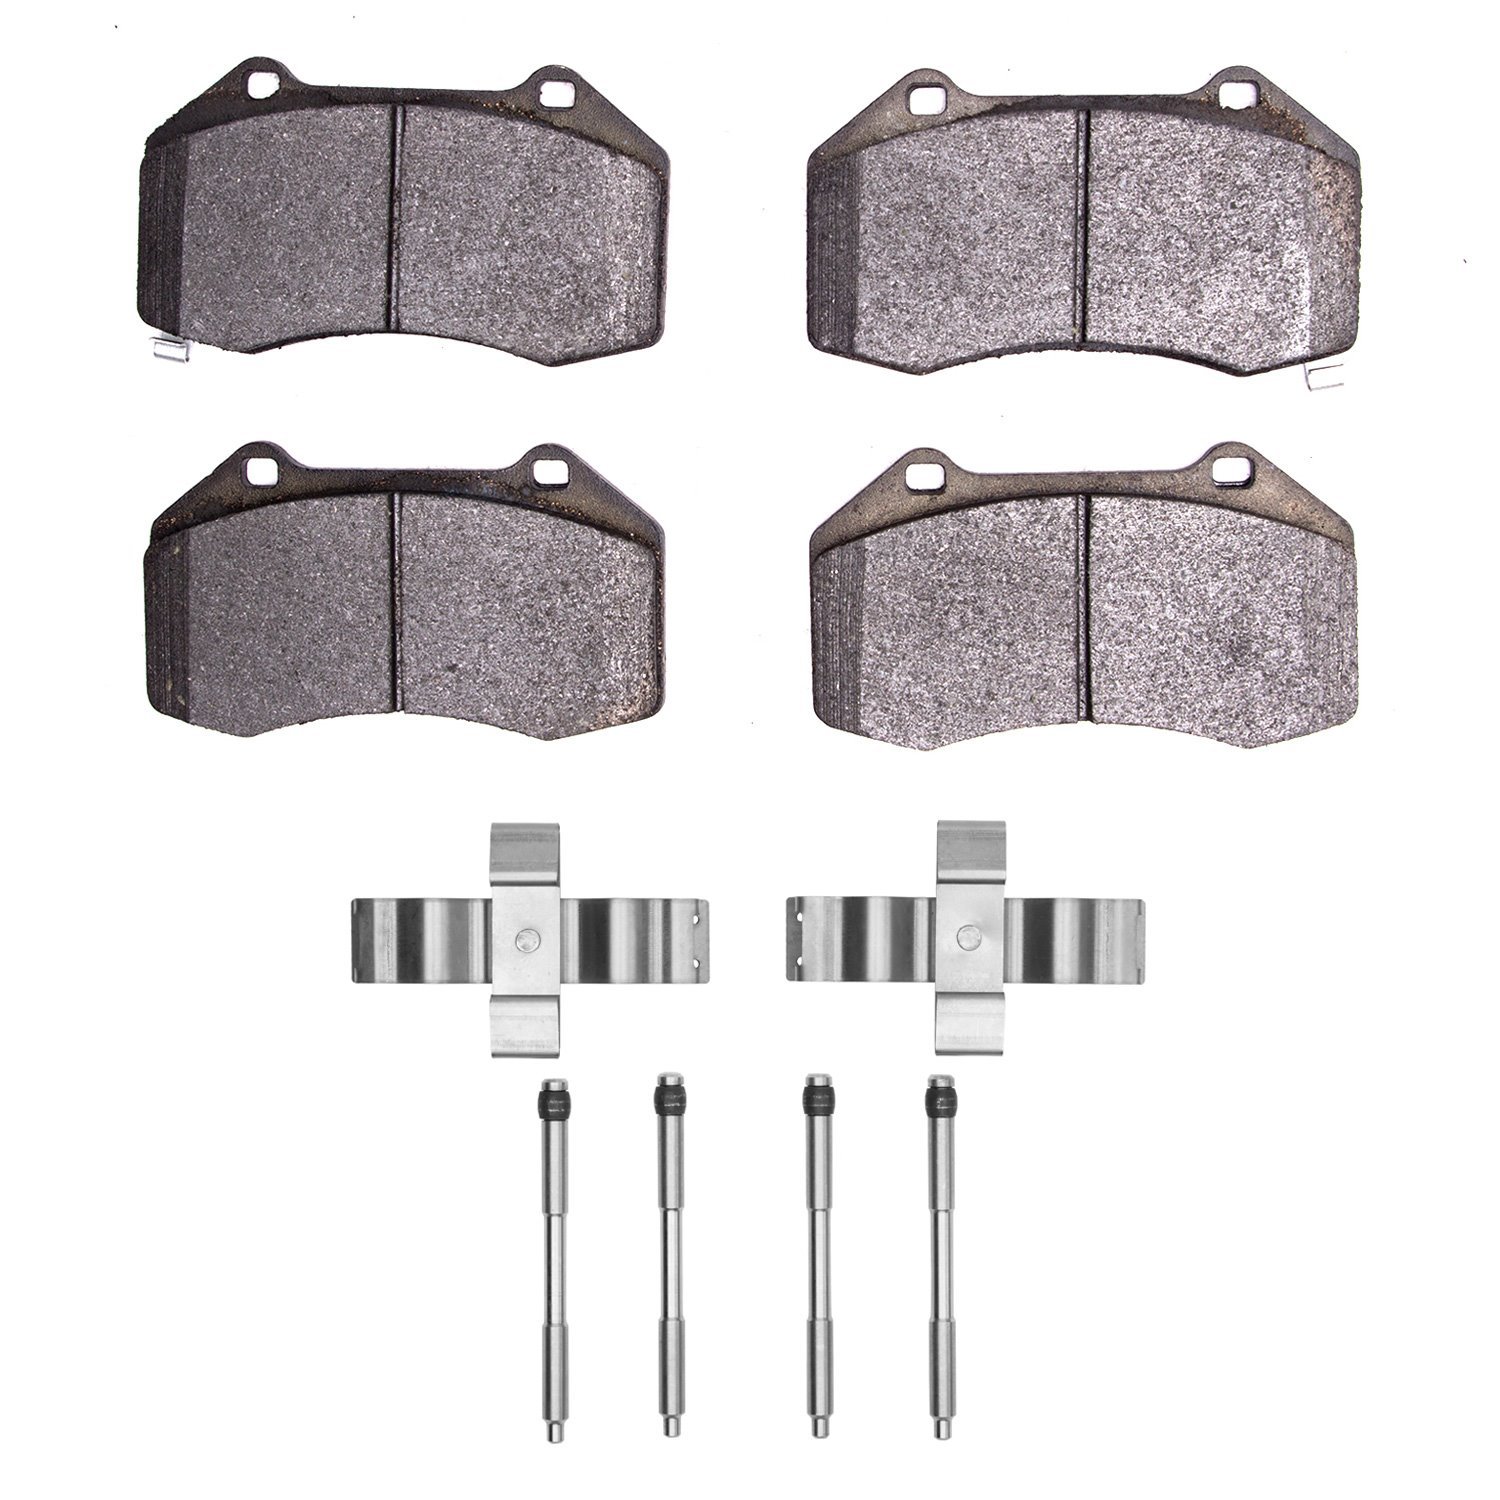 1551-1379-21 5000 Advanced Low-Metallic Brake Pads & Hardware Kit, Fits Select Multiple Makes/Models, Position: Front